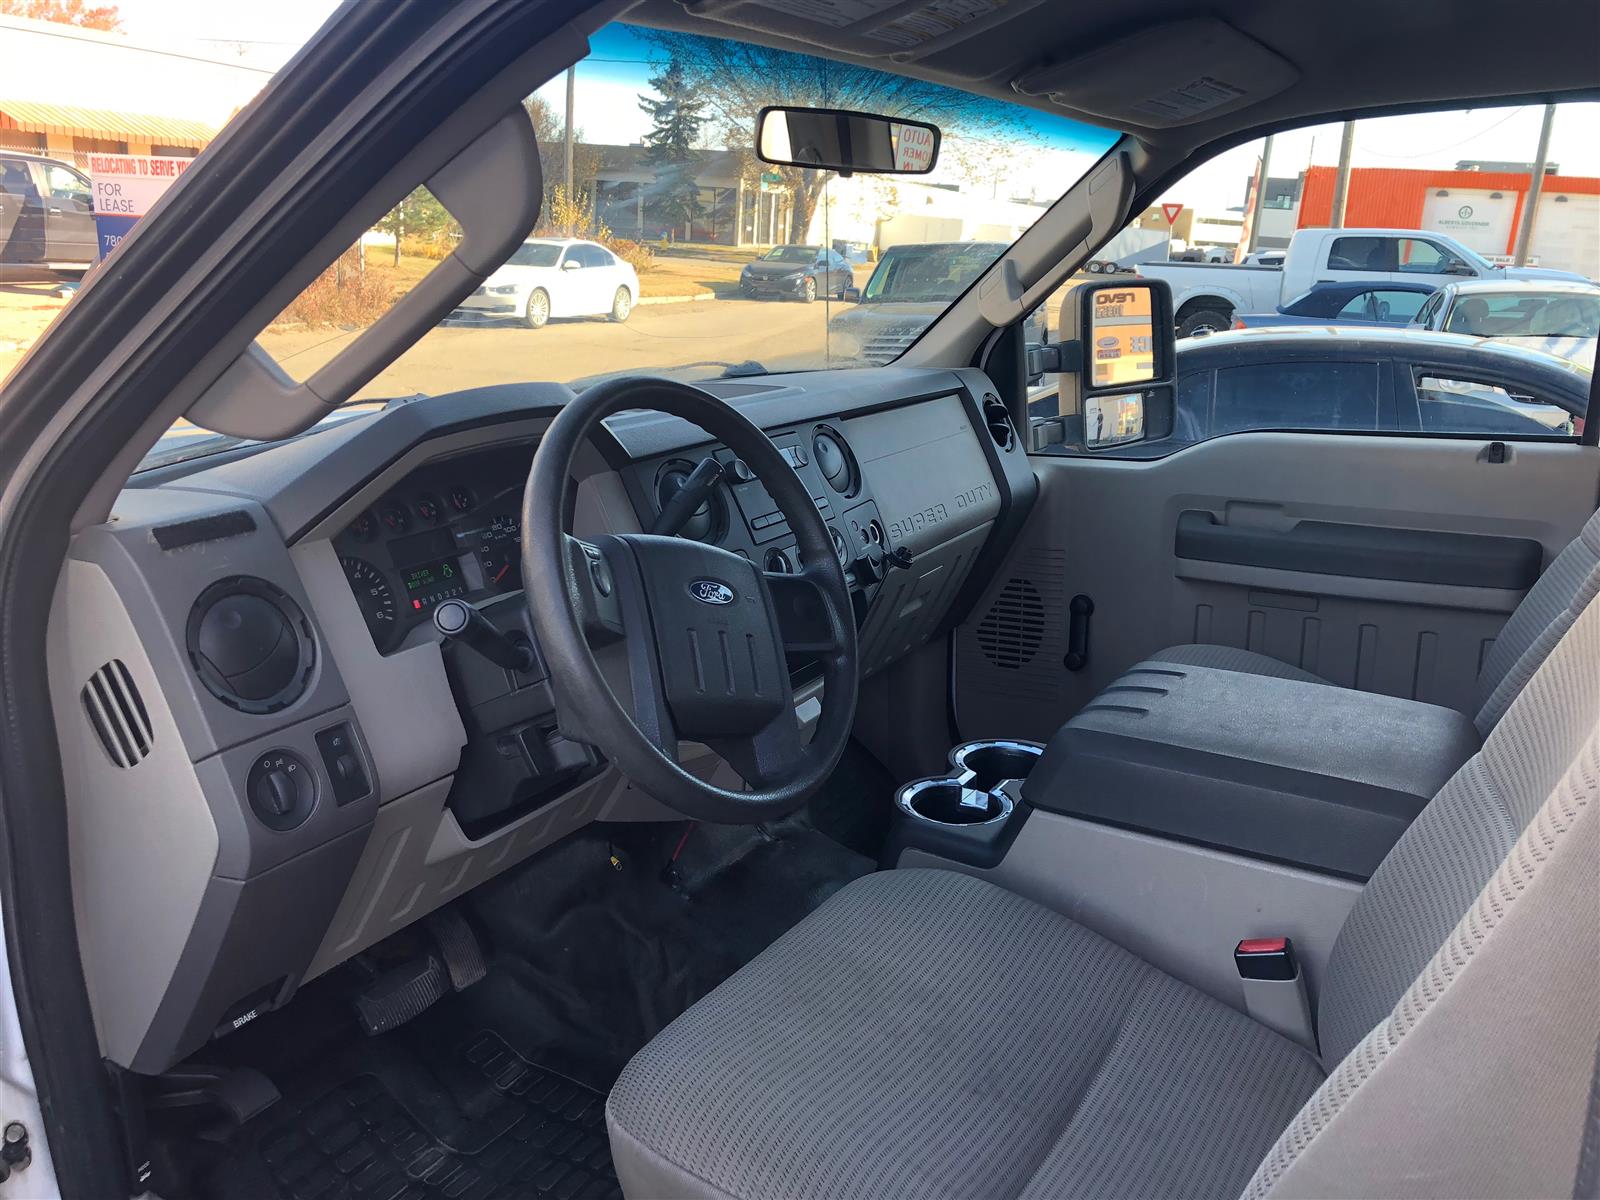 Used 2008 Ford F-250 in Edmonton,AB